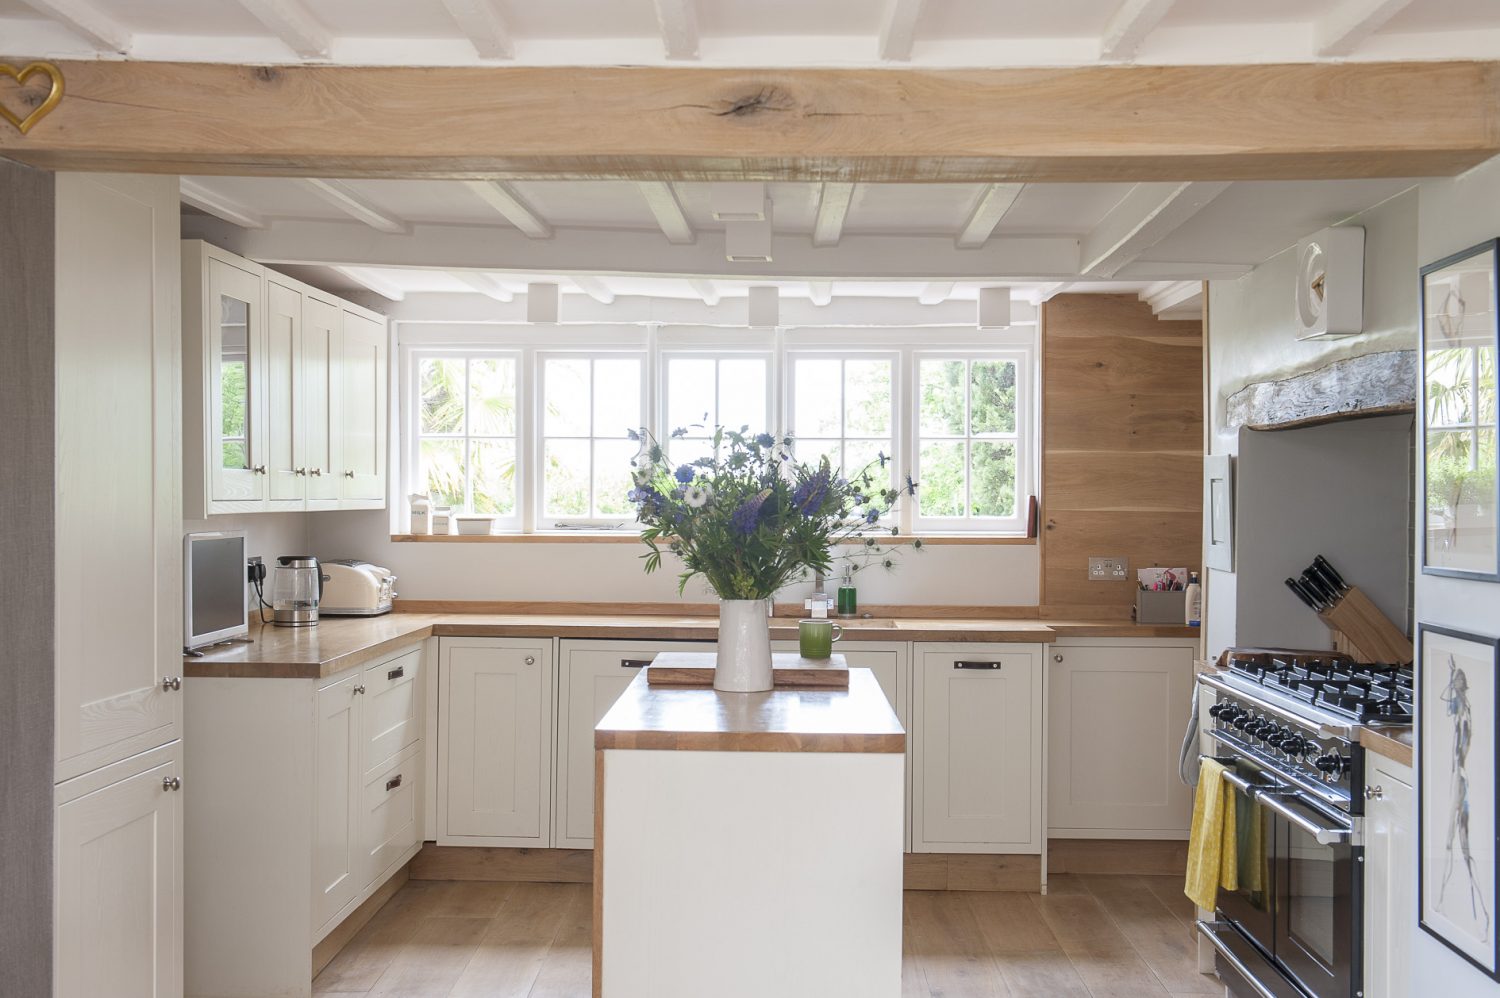 Cream-painted units and pale oak worksurfaces reflect the light